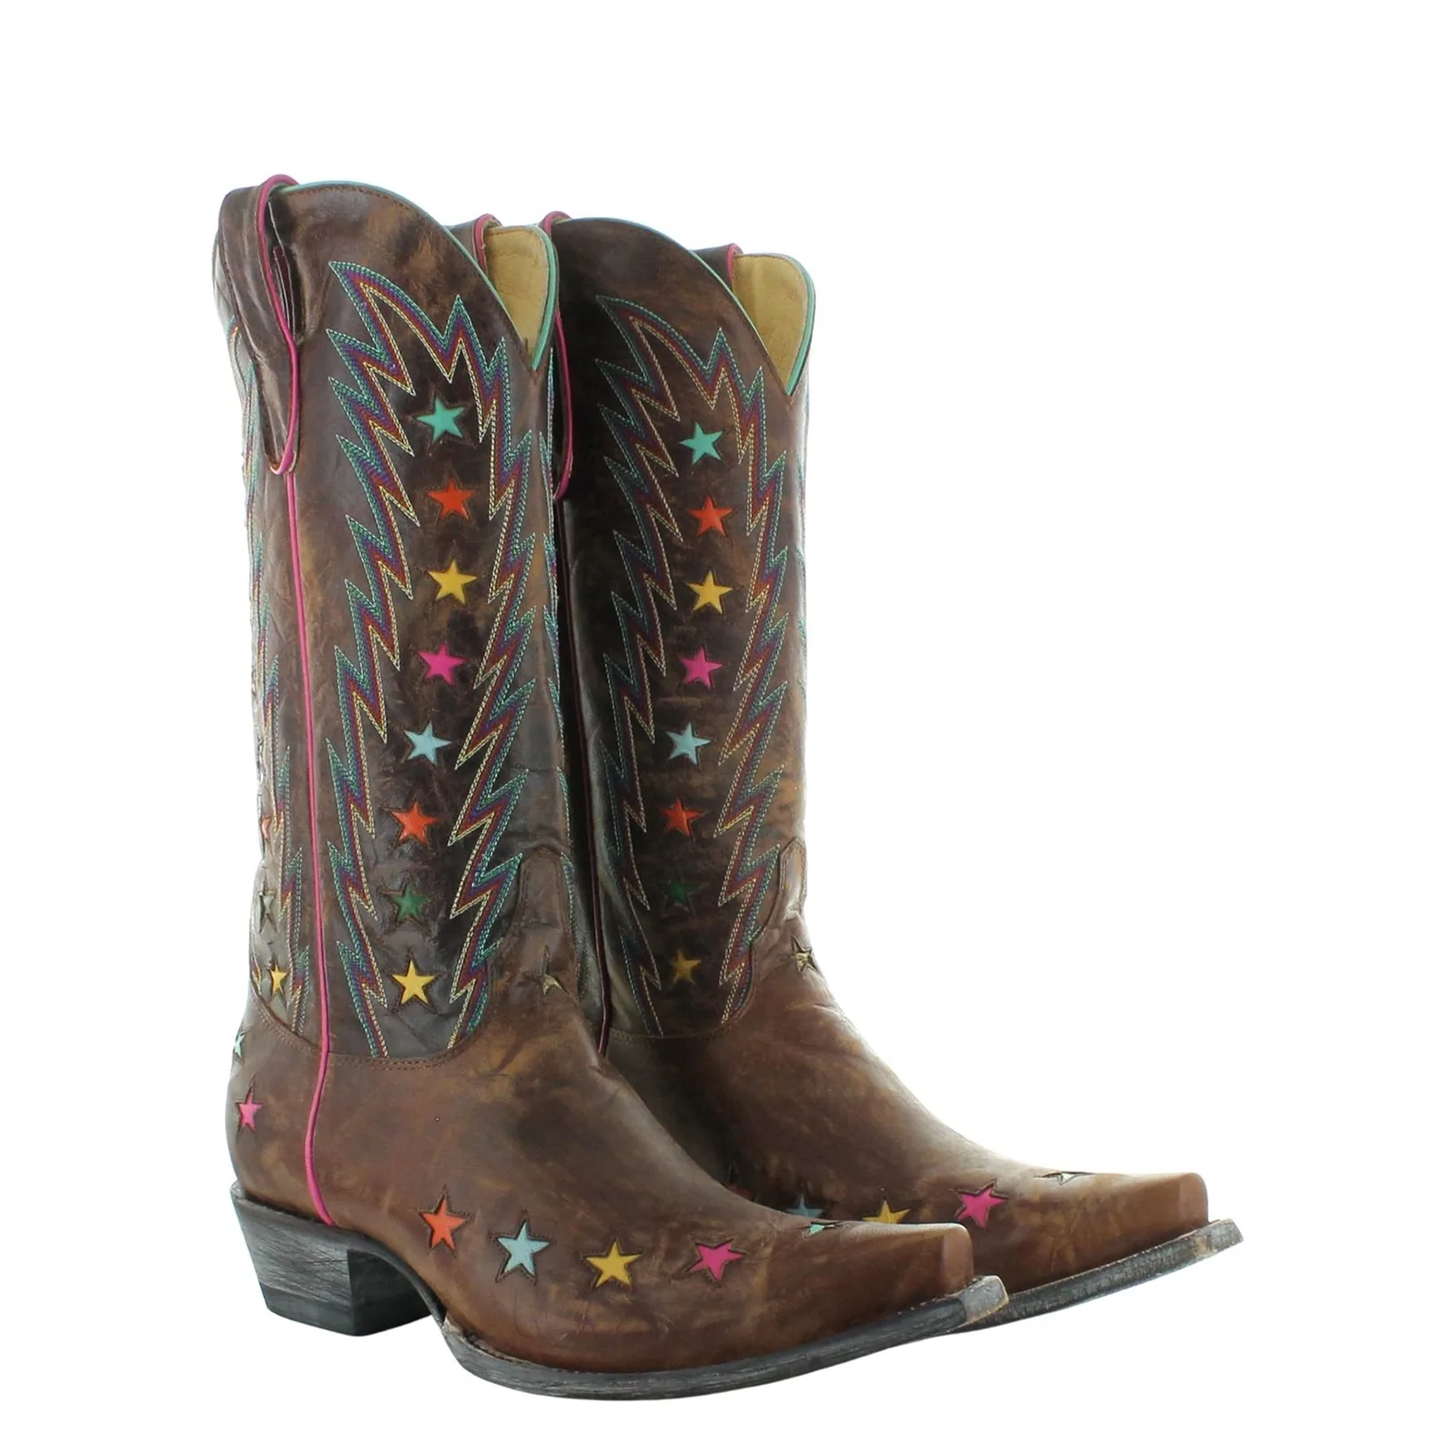 Yippee Ki Yay by Old Gringo Ladies Legacy 13" Brass Western Boots YL519-1